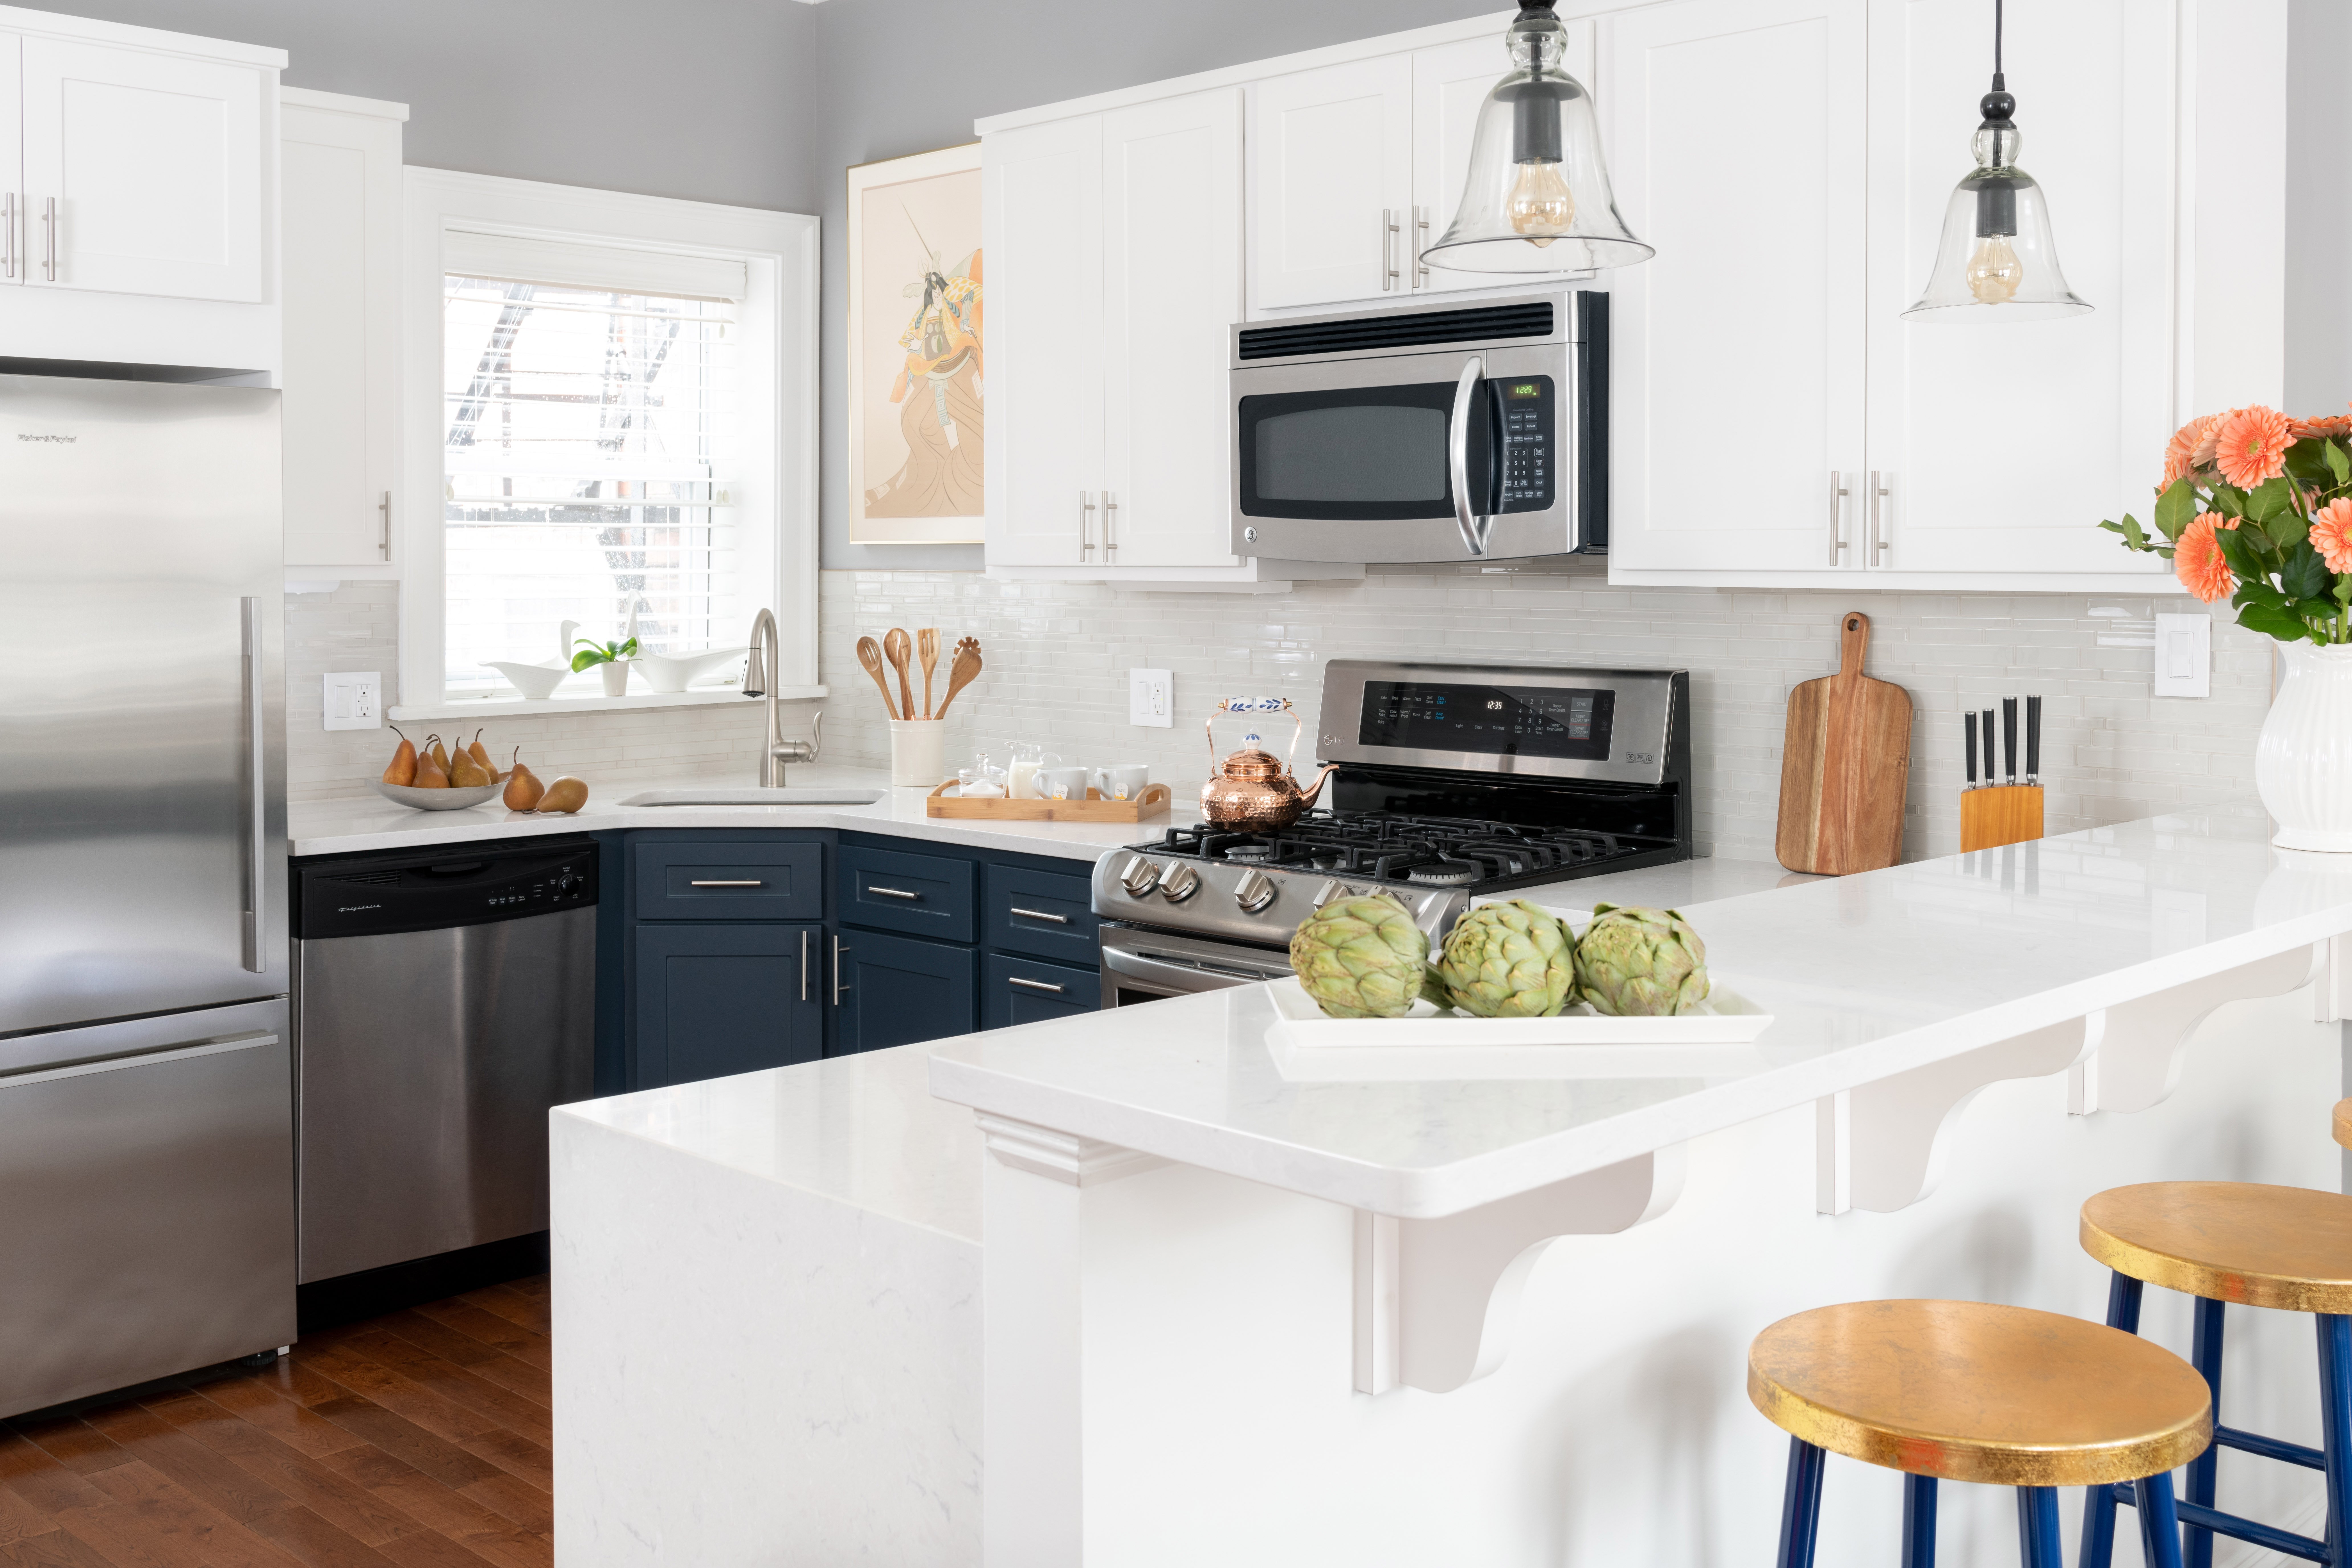 Which Paint Colors Look Best with White Cabinets?